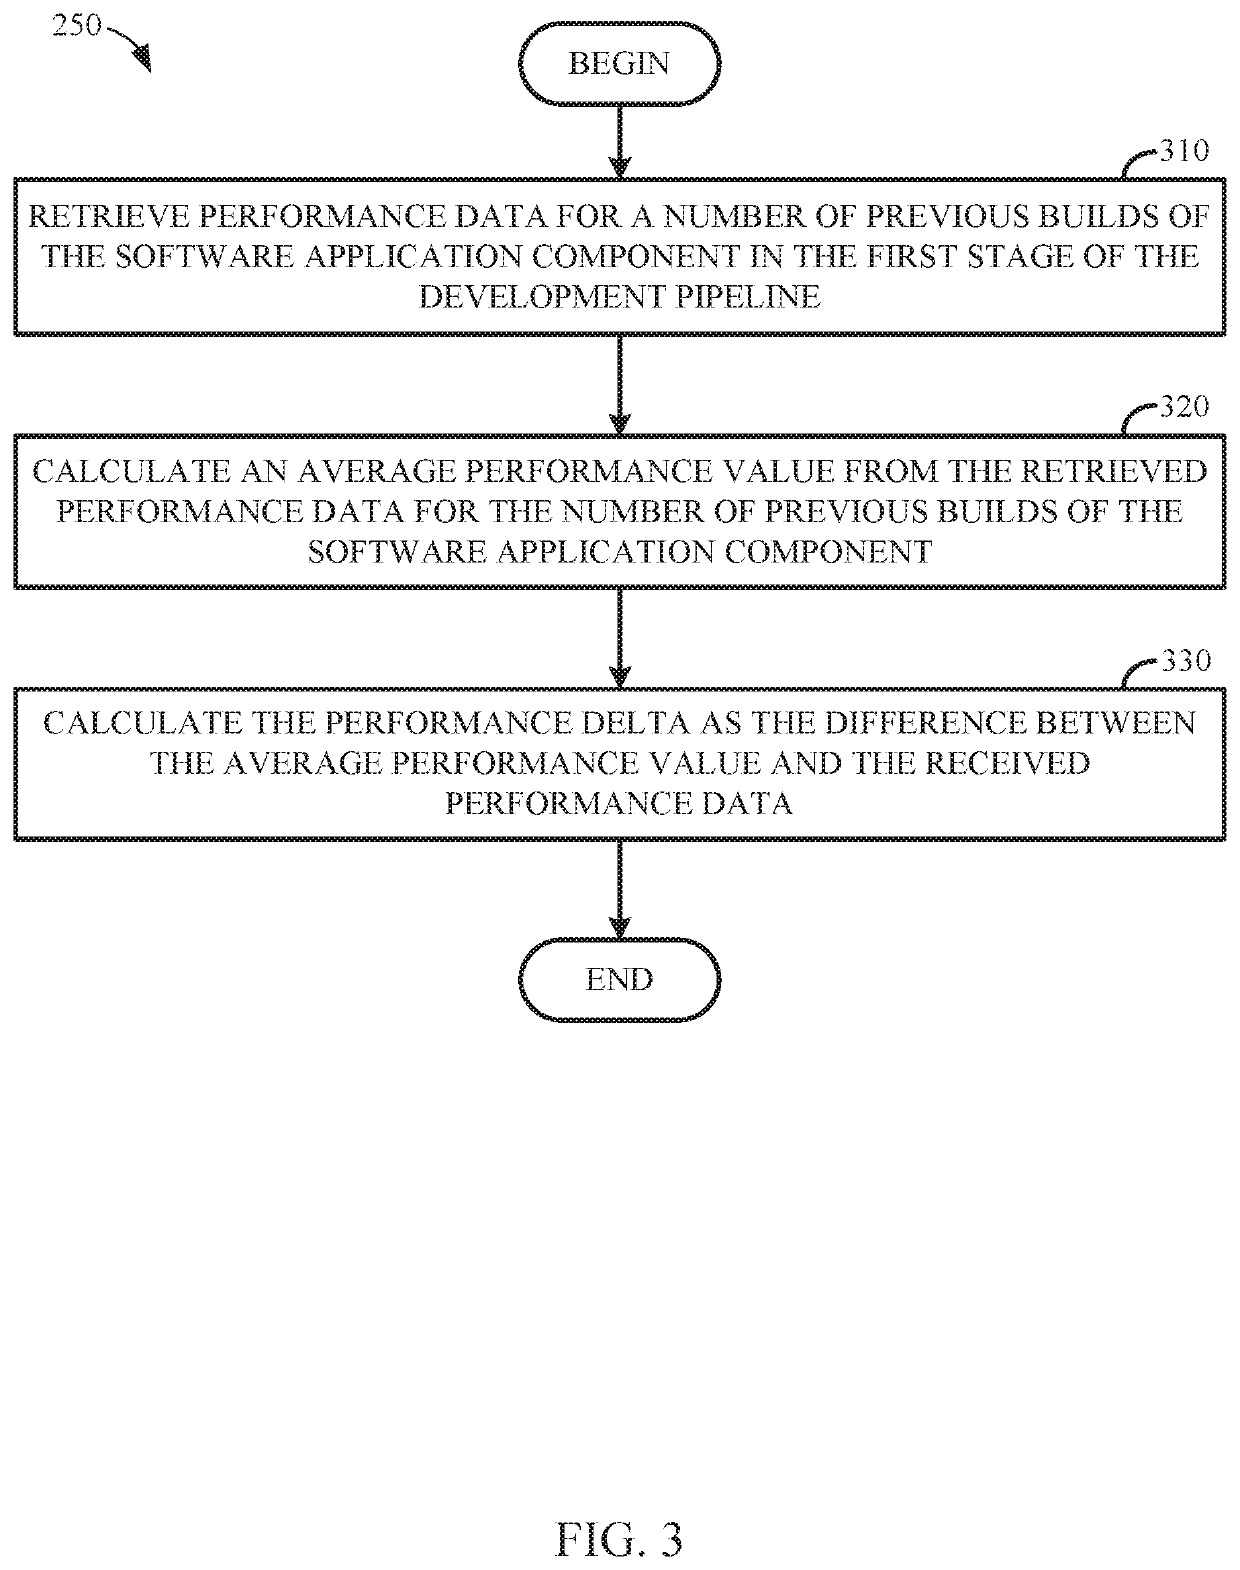 Method and system for managing deployment of software application components based on software performance data